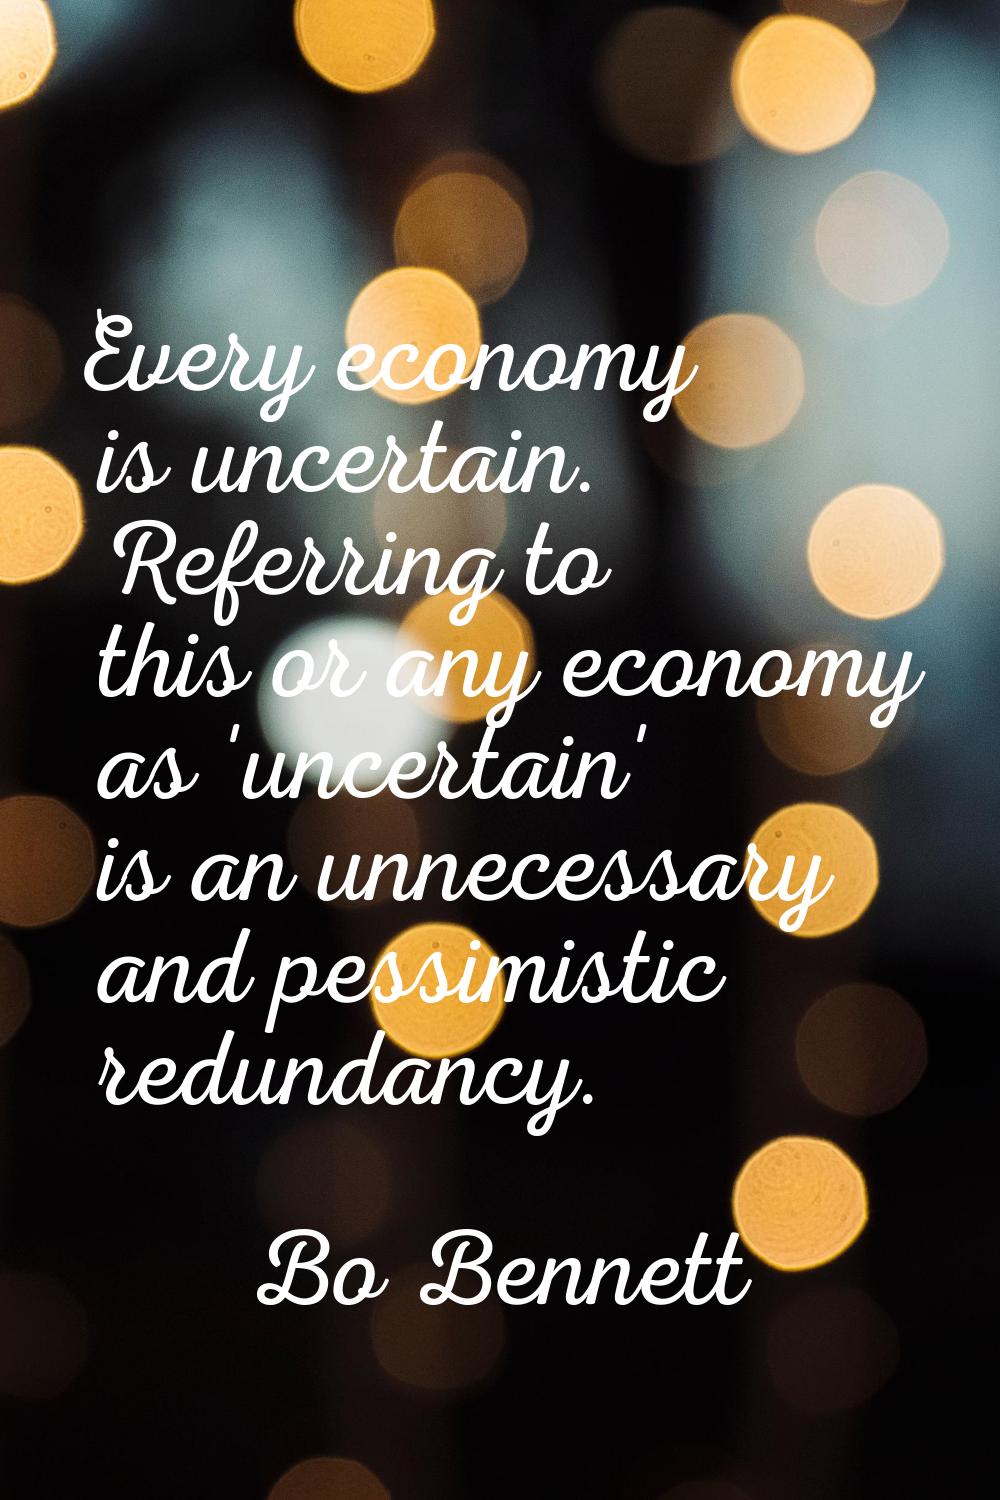 Every economy is uncertain. Referring to this or any economy as 'uncertain' is an unnecessary and p